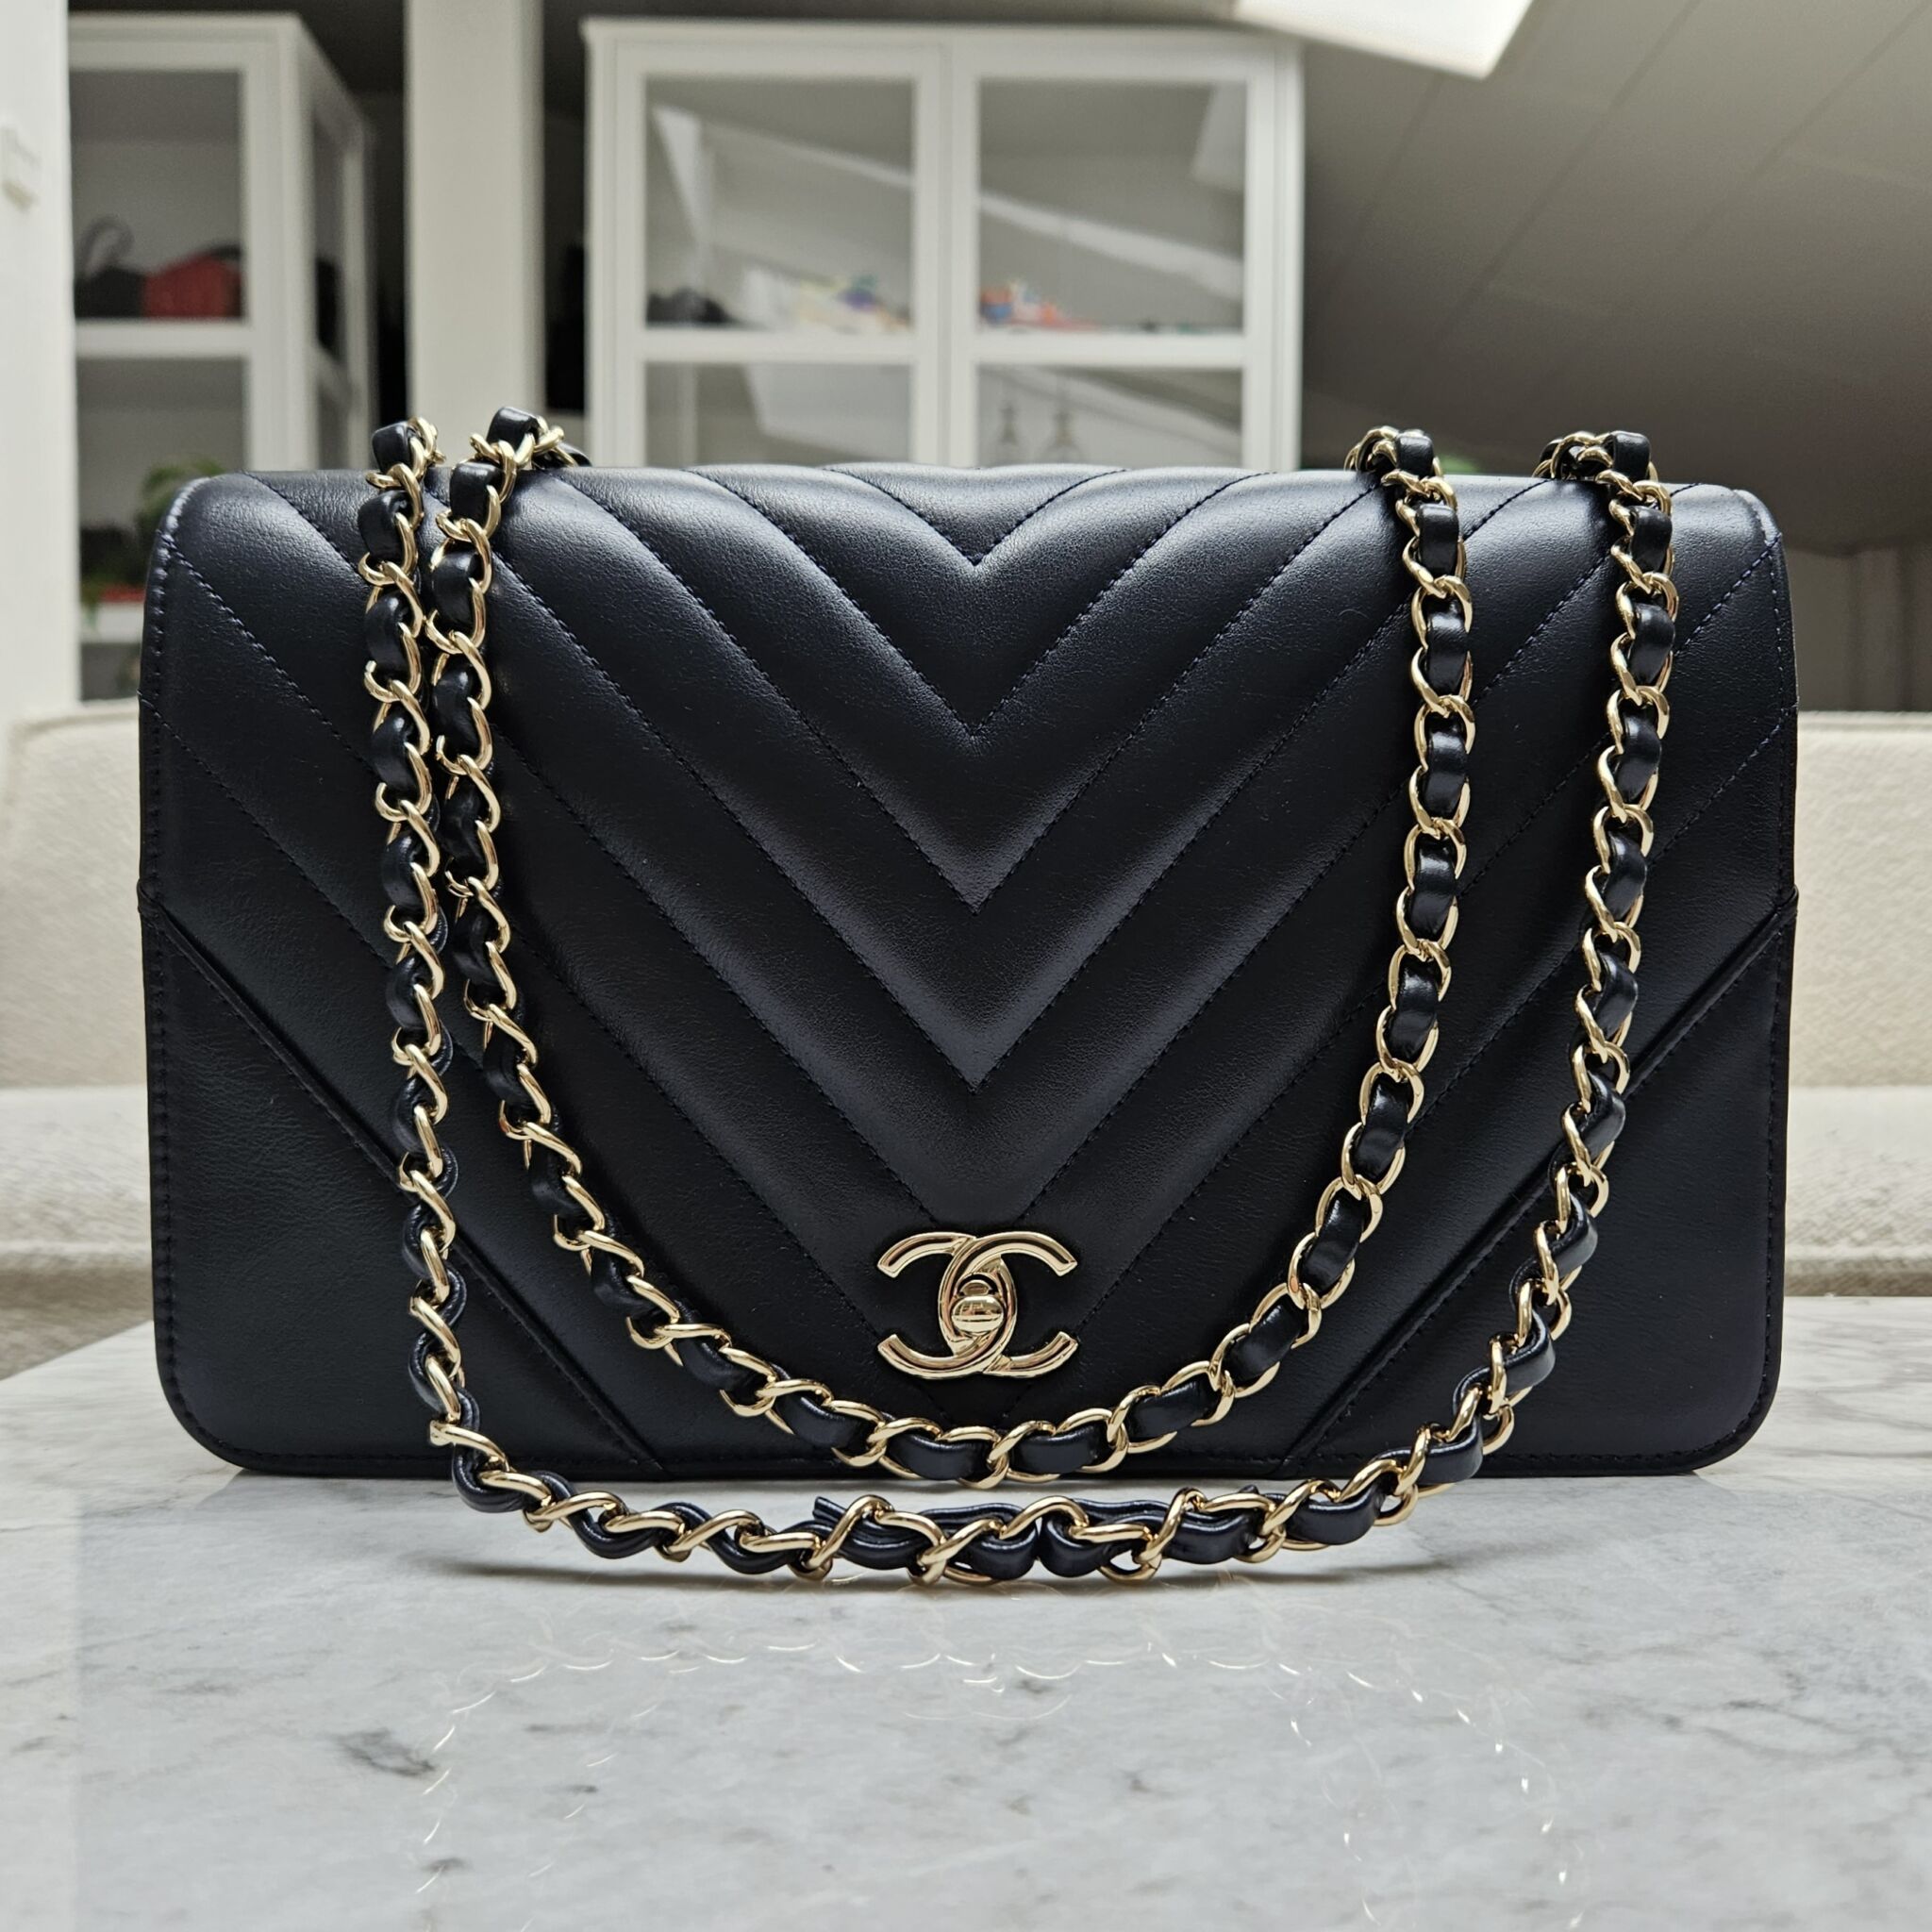 Gold Medium Flap Chanel - 325 For Sale on 1stDibs